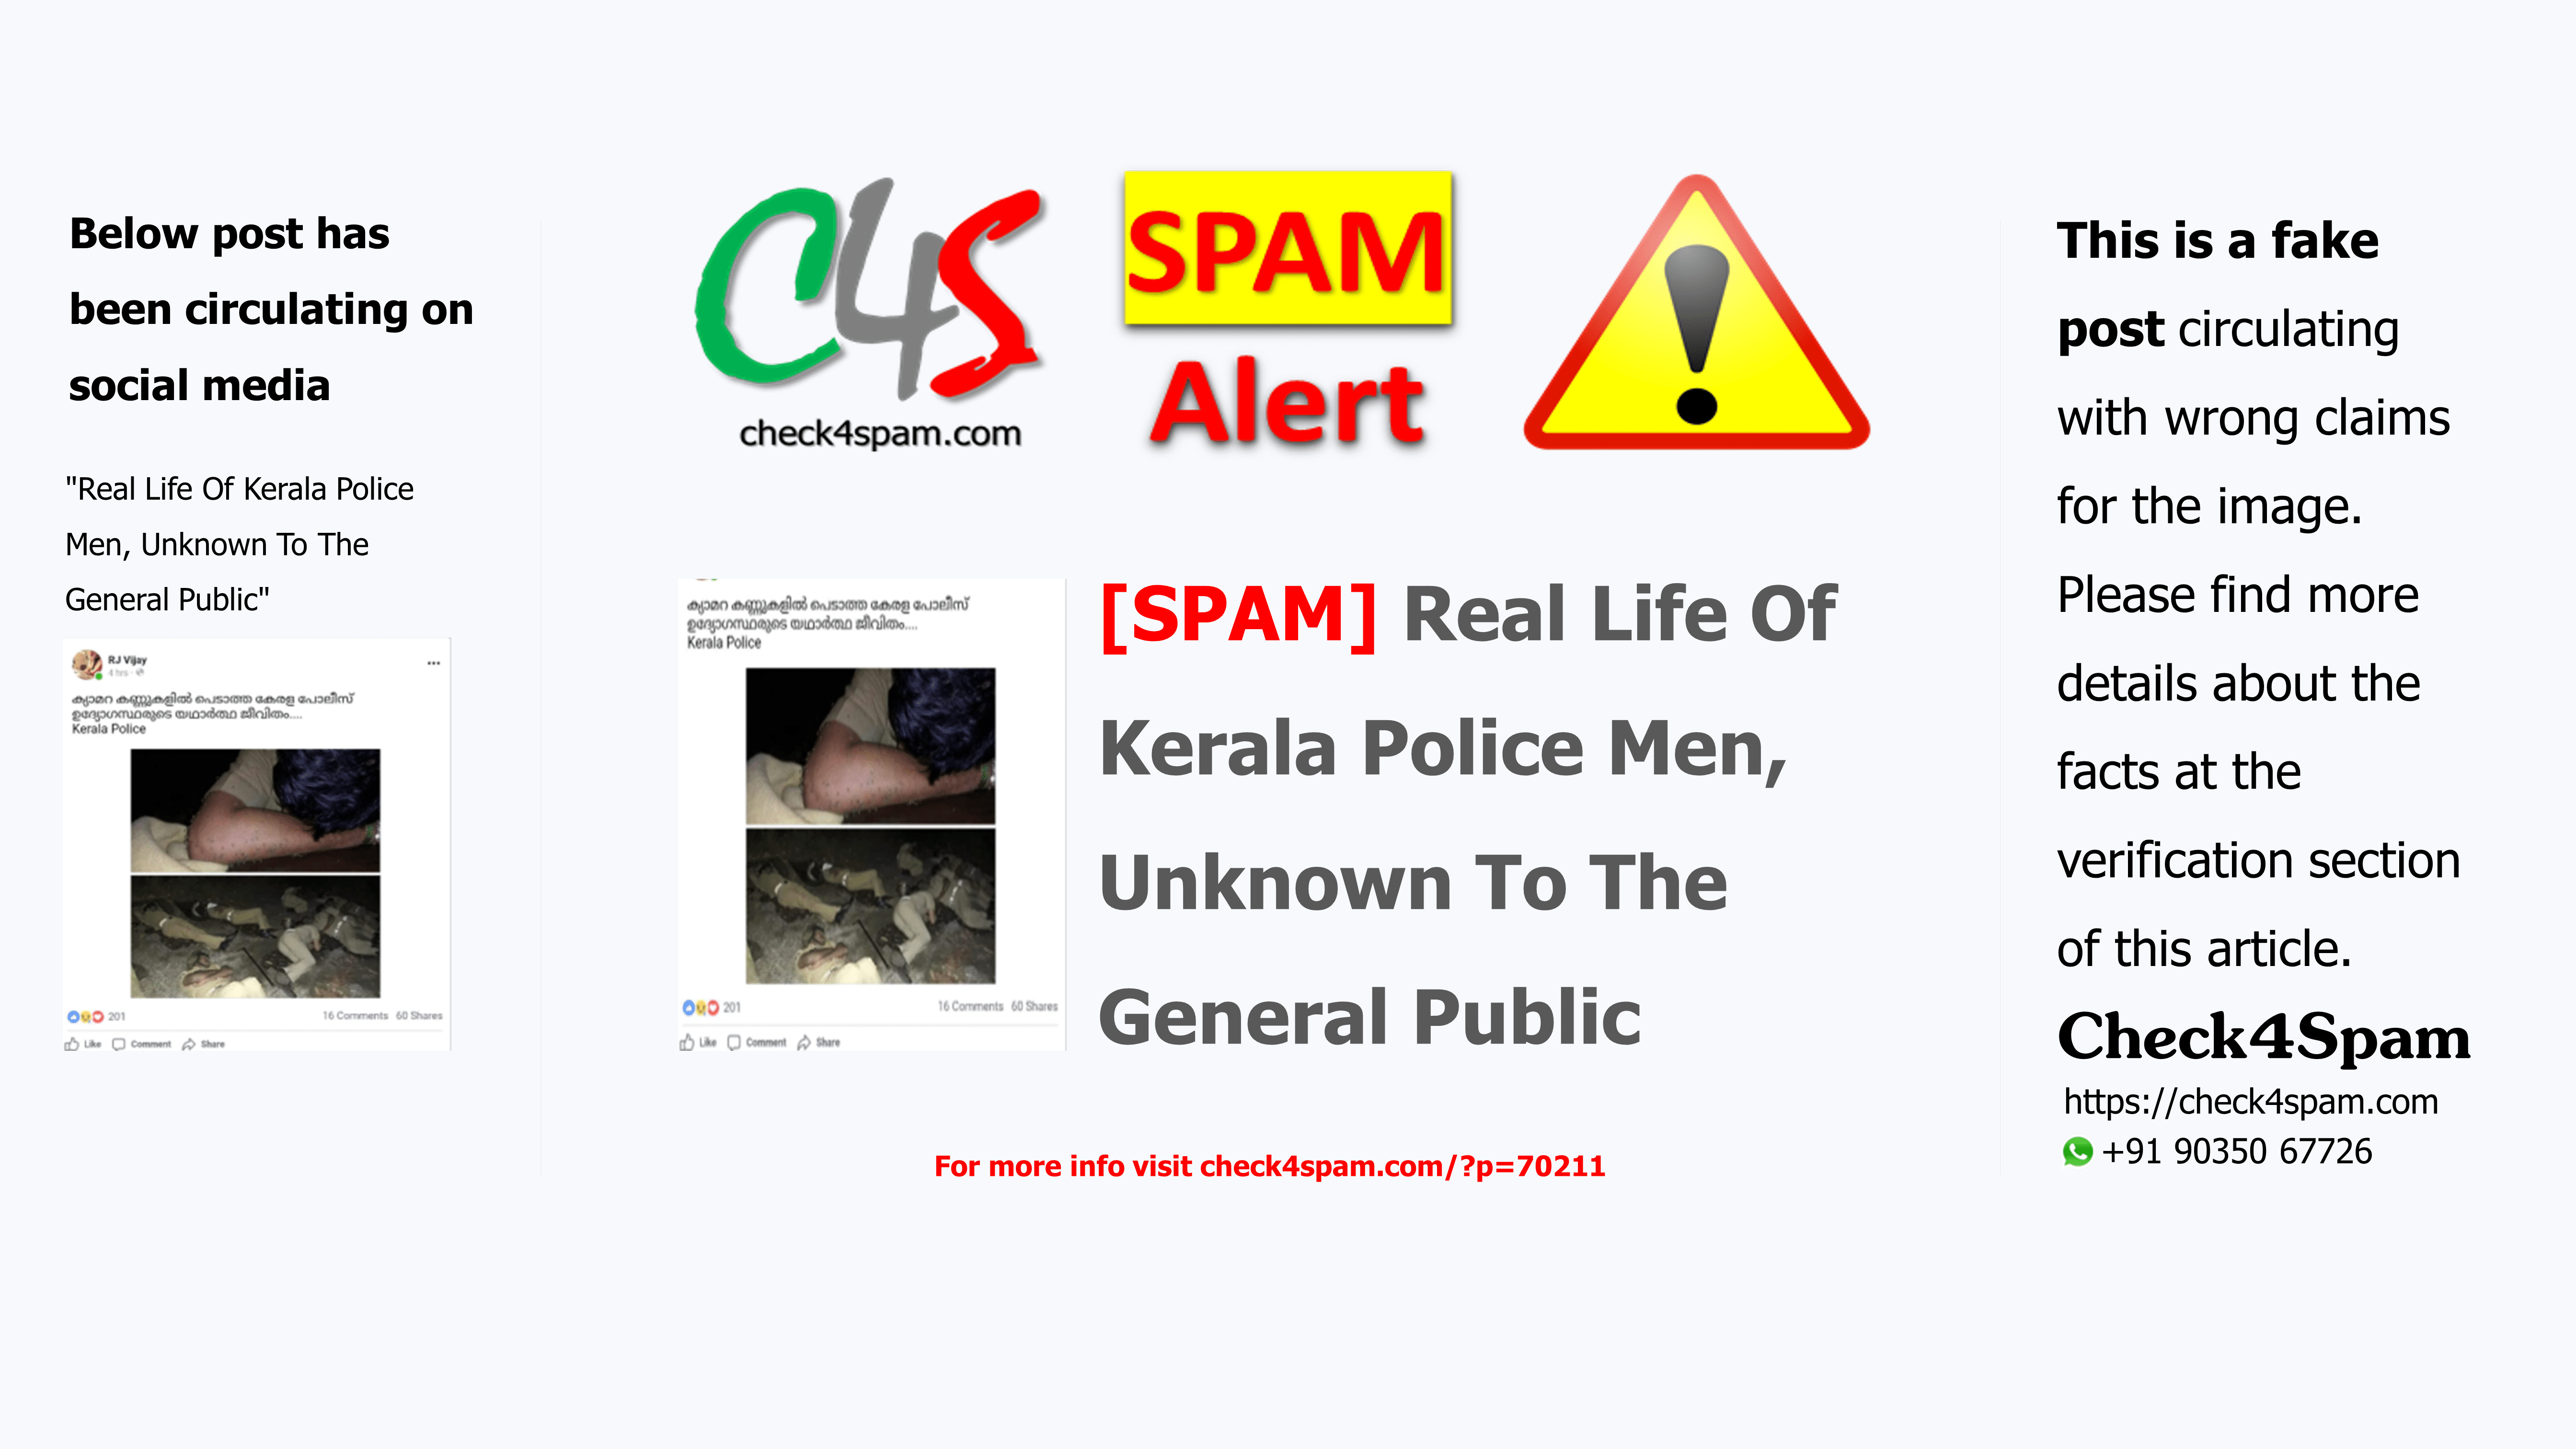 [SPAM] Real Life Of Kerala Police Men, Unknown To The General Public